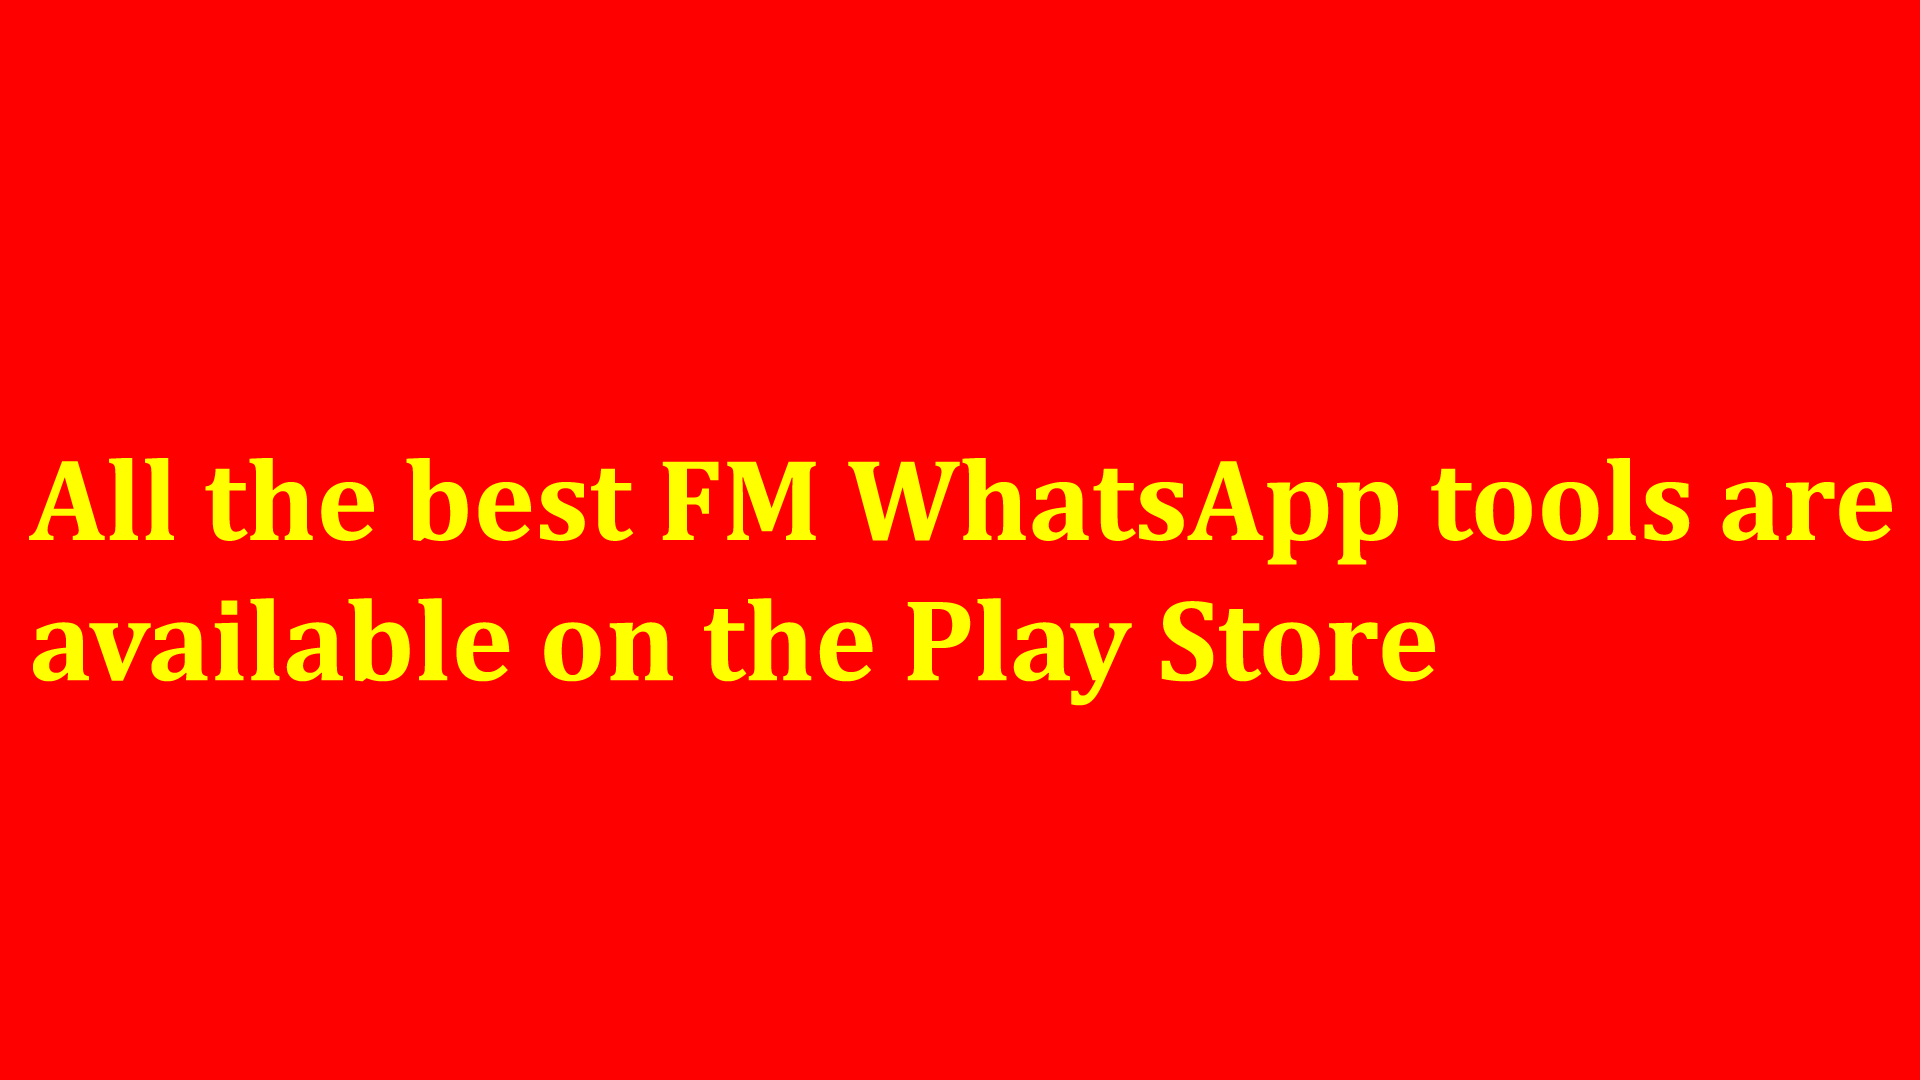 All the best FM WhatsApp tools are available on the Play Store